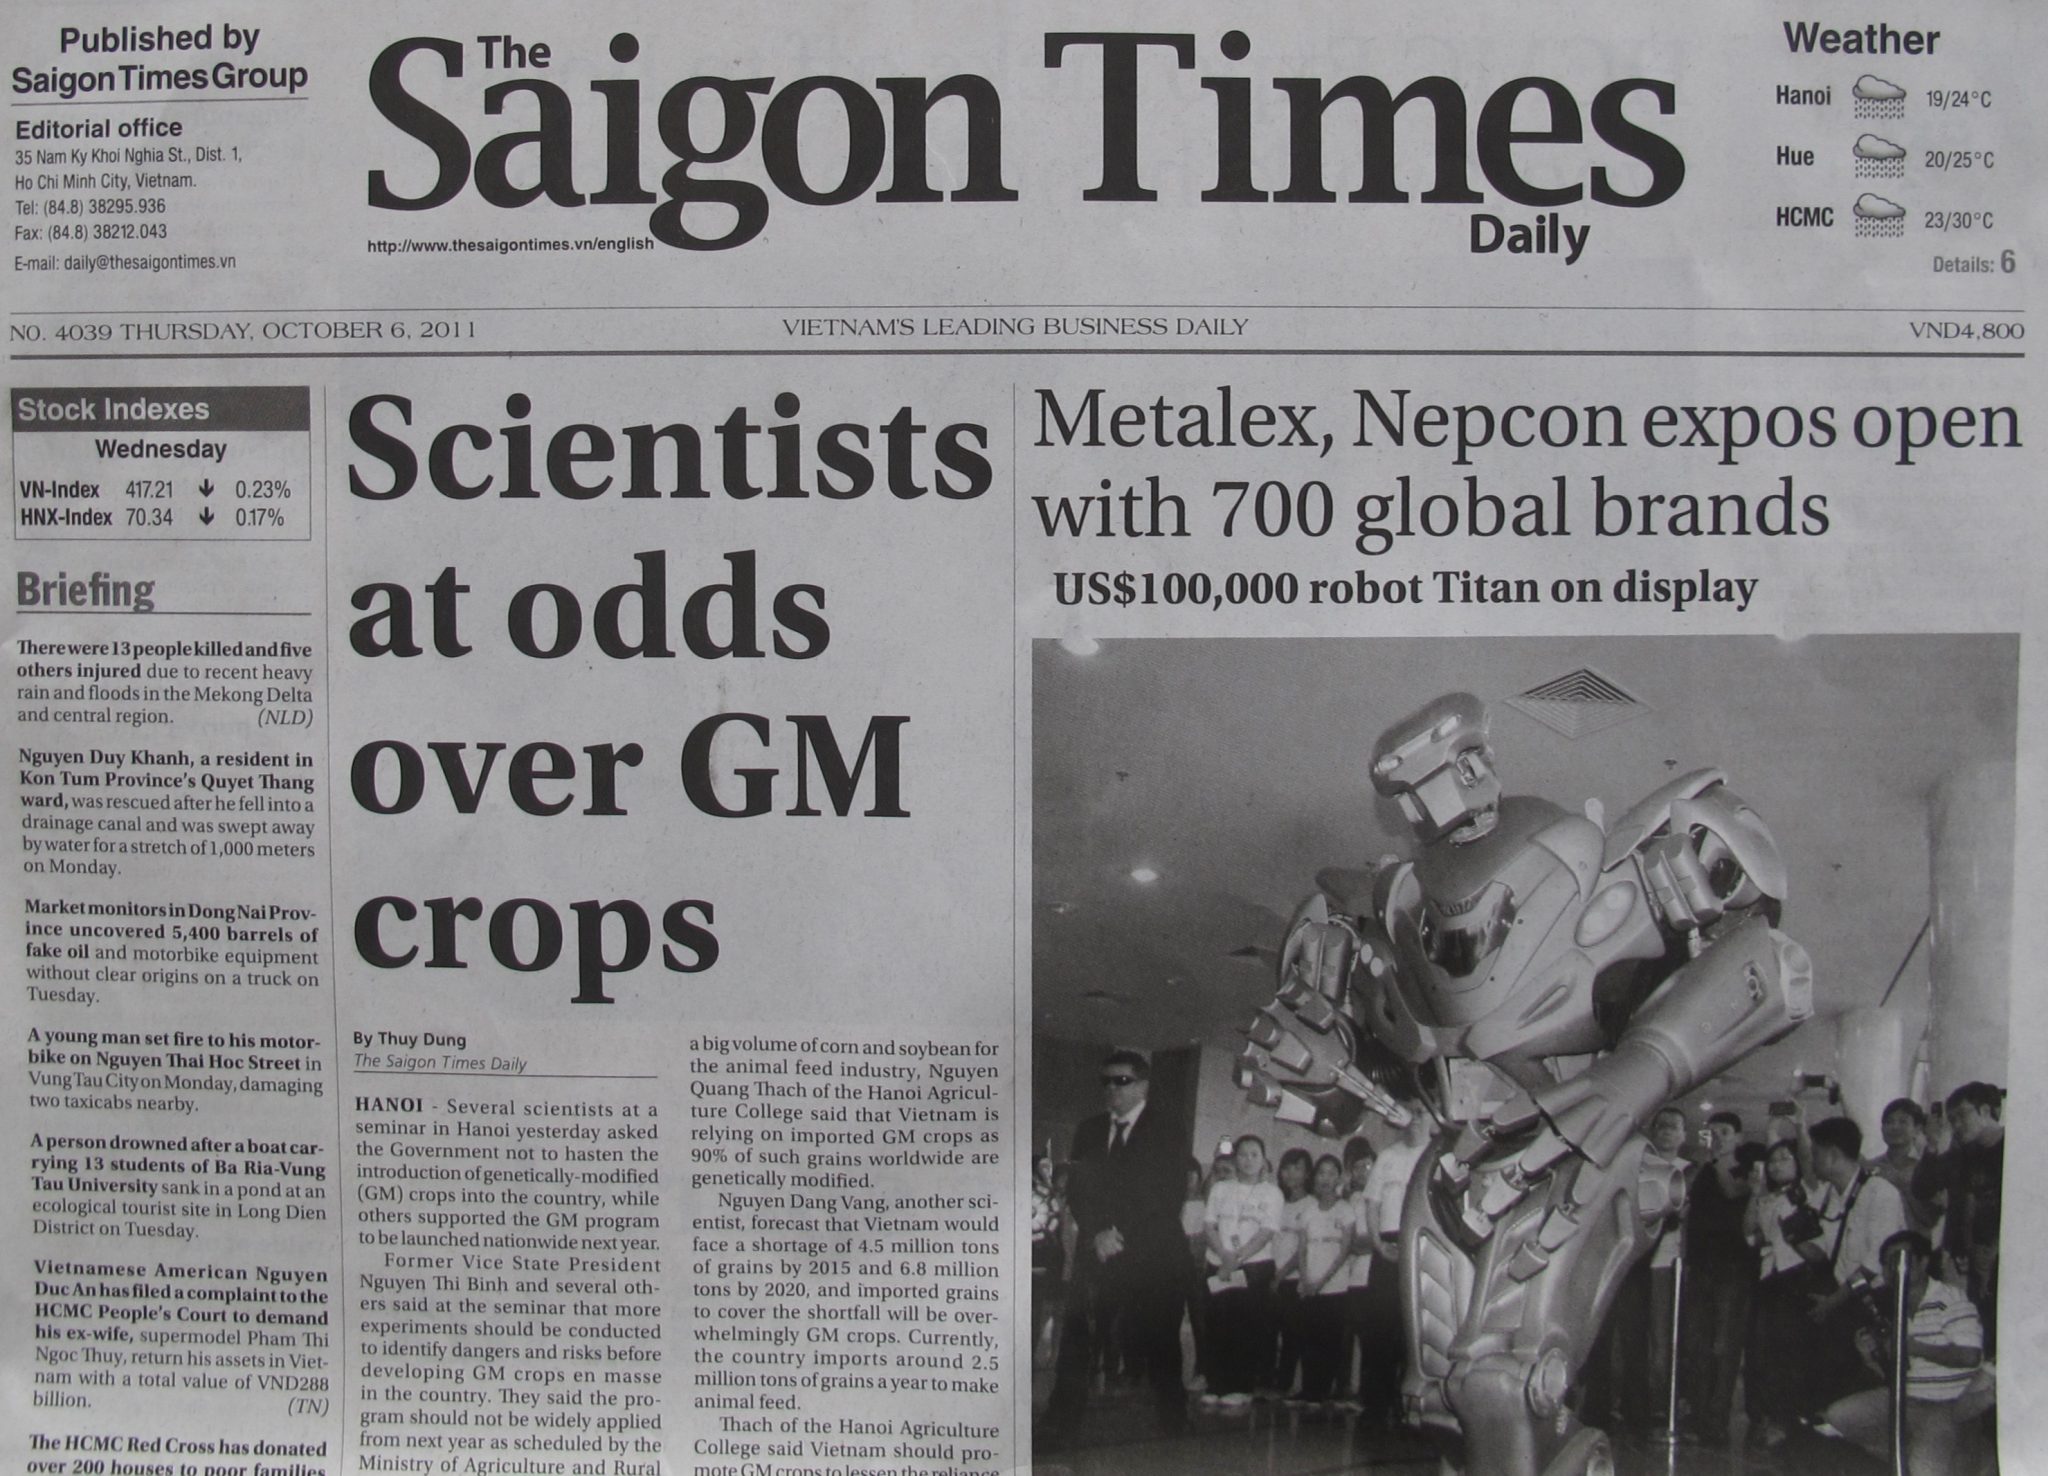 Titan the Robot on the front cover of the Saigon Times in Vietnam